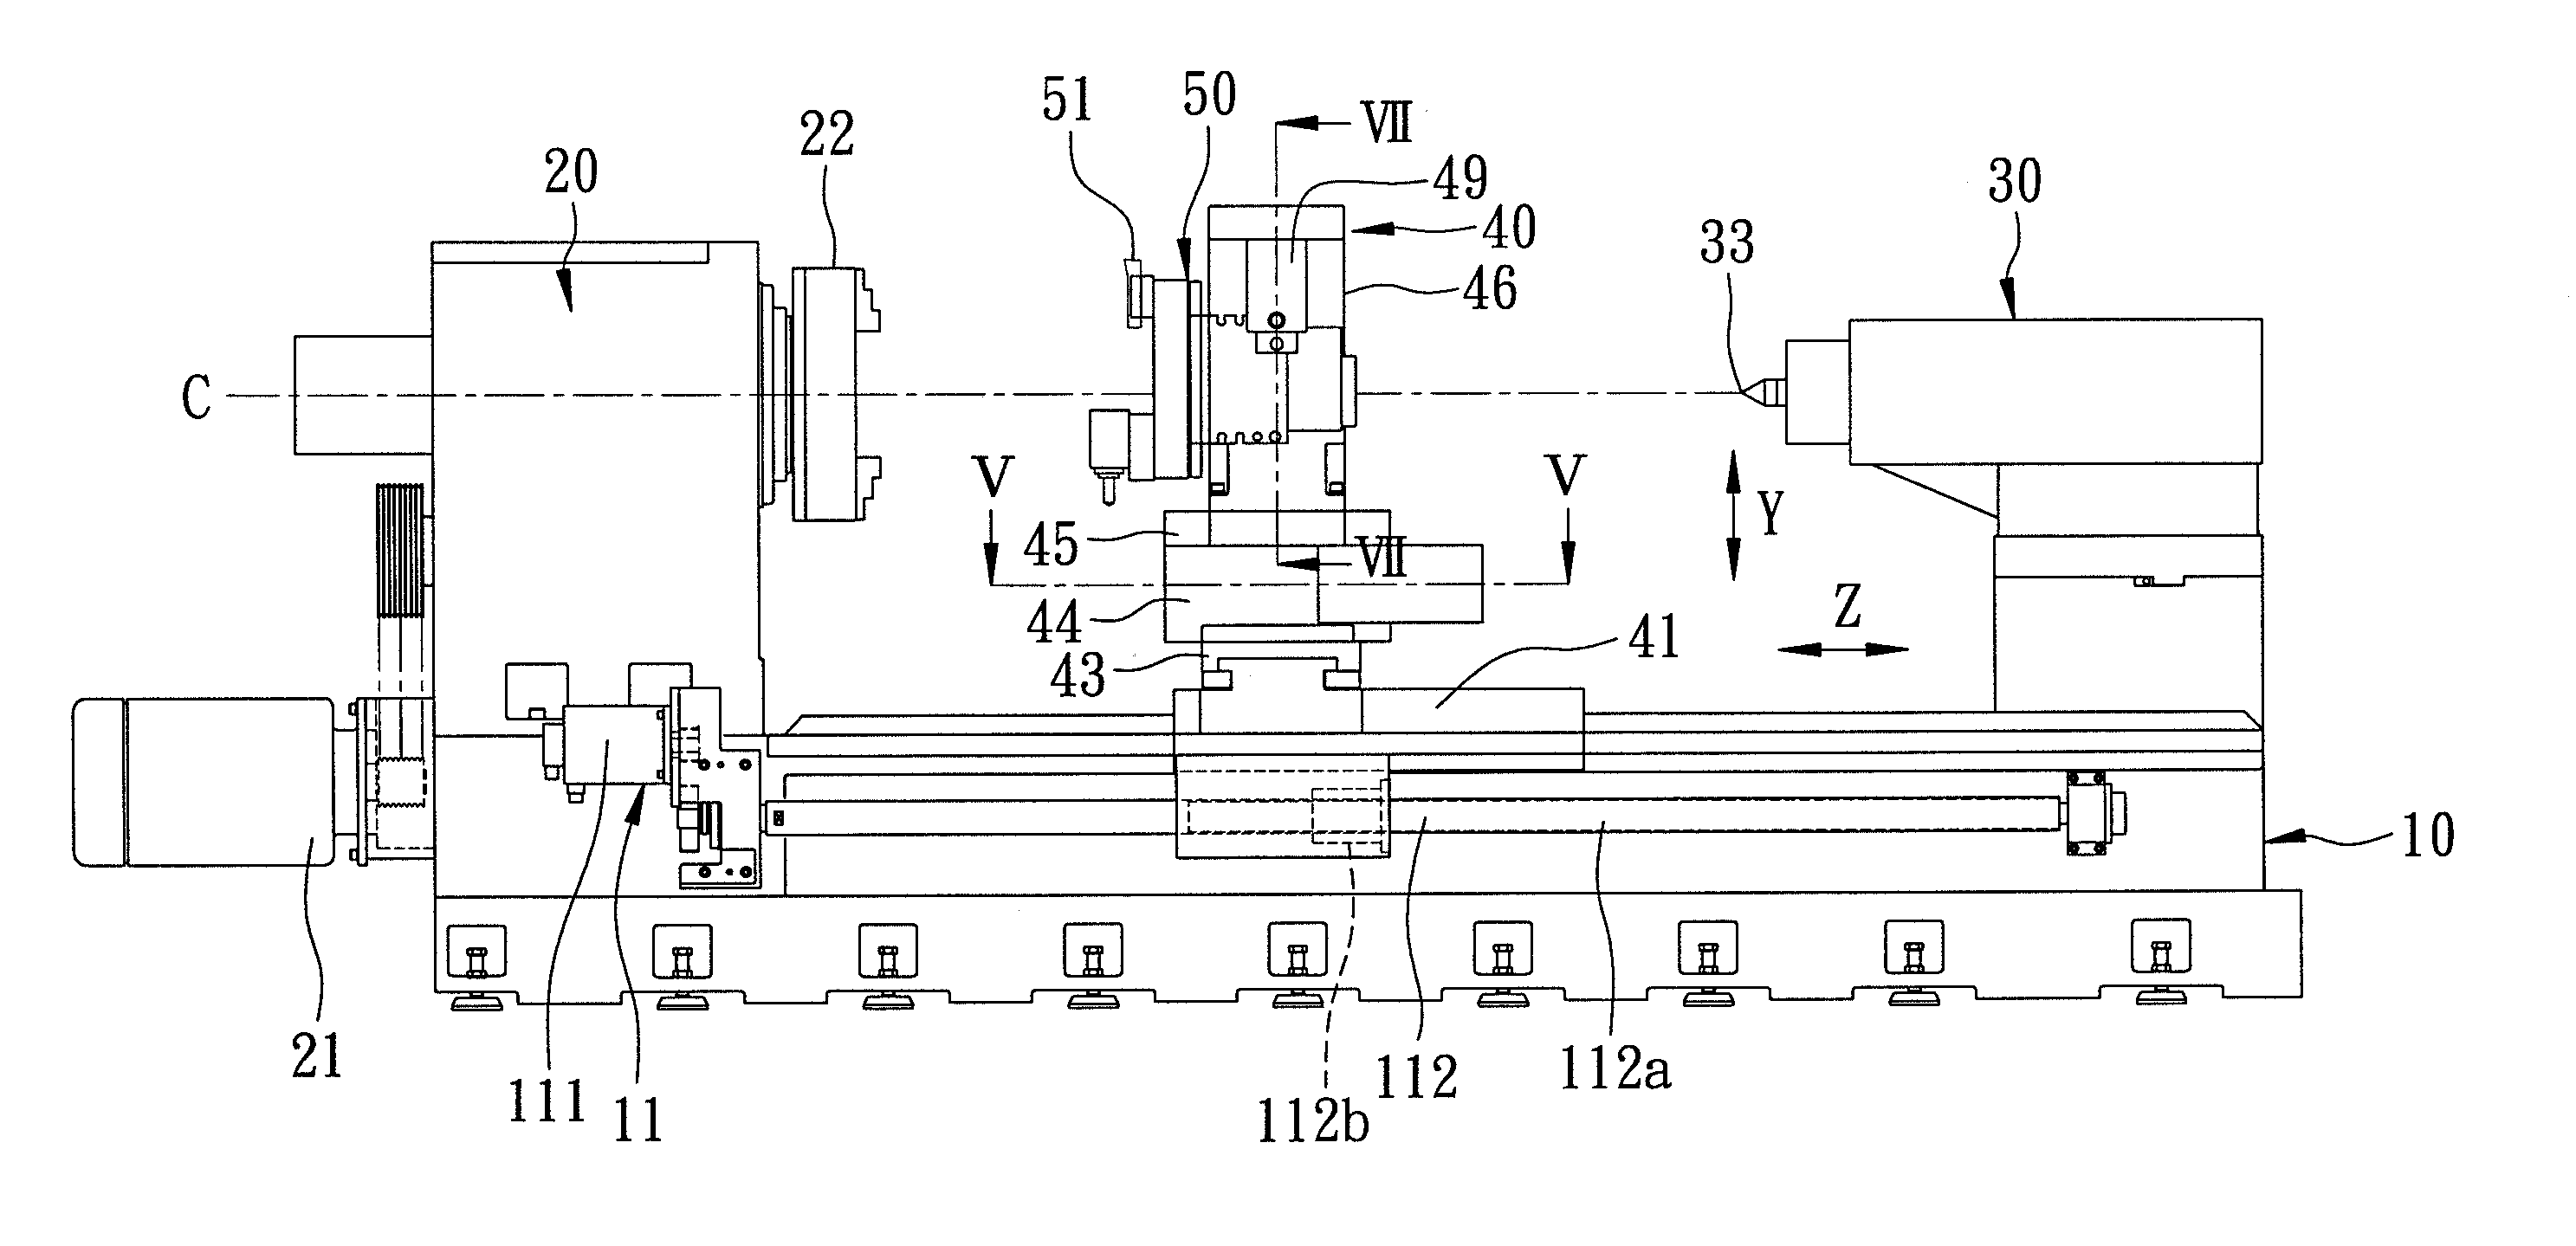 Tool holding device for a five-axis lathe